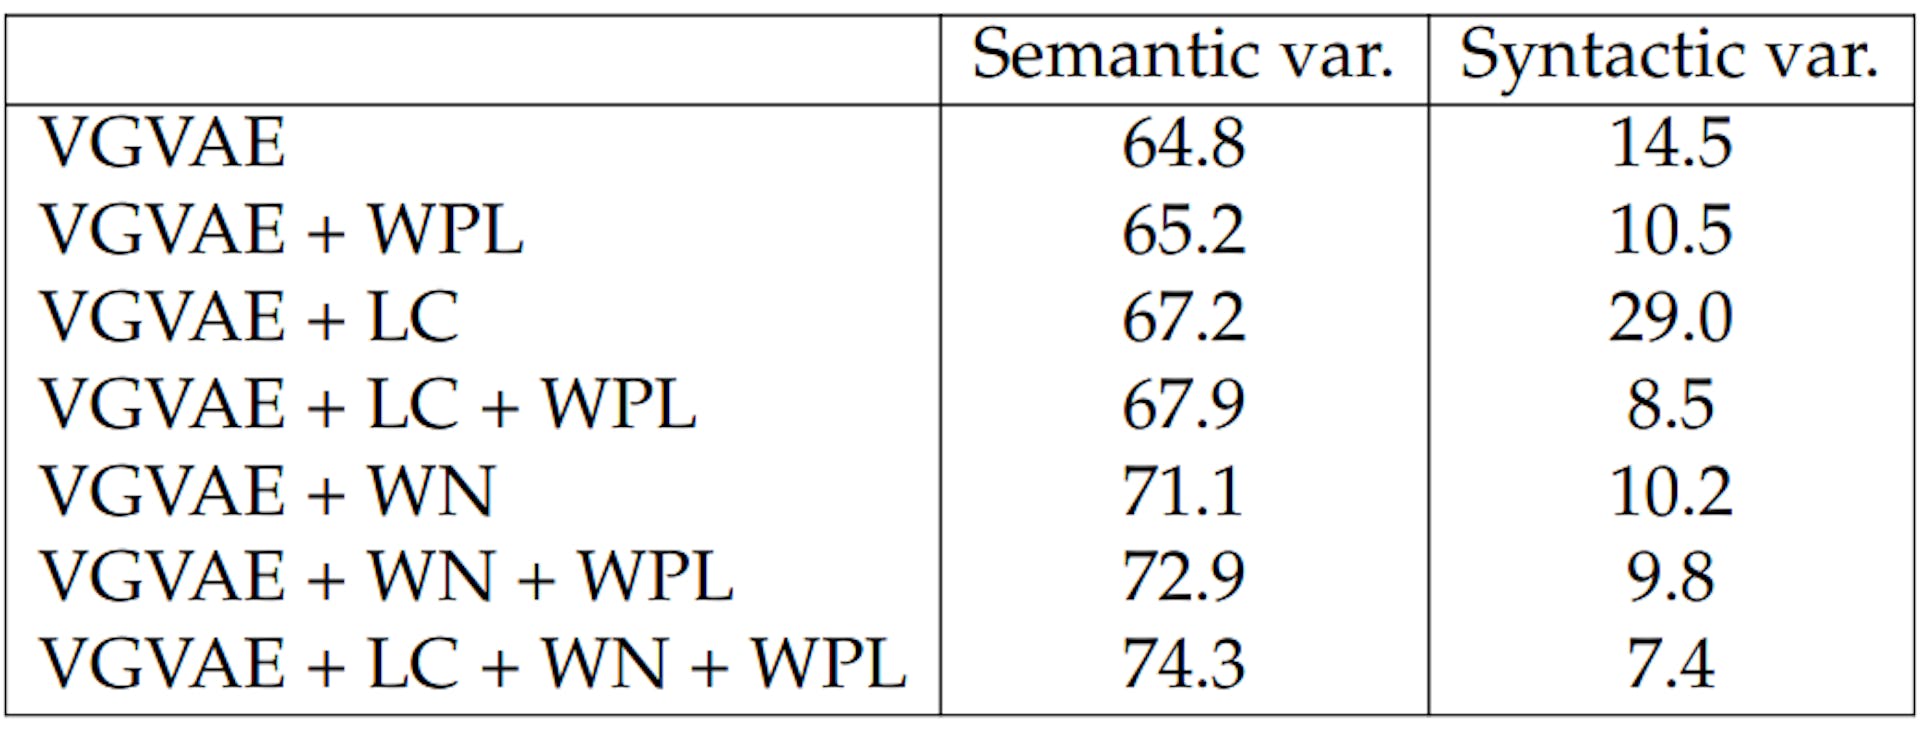 Table 5.8: Pearson correlation (%) for STS Benchmark test set.